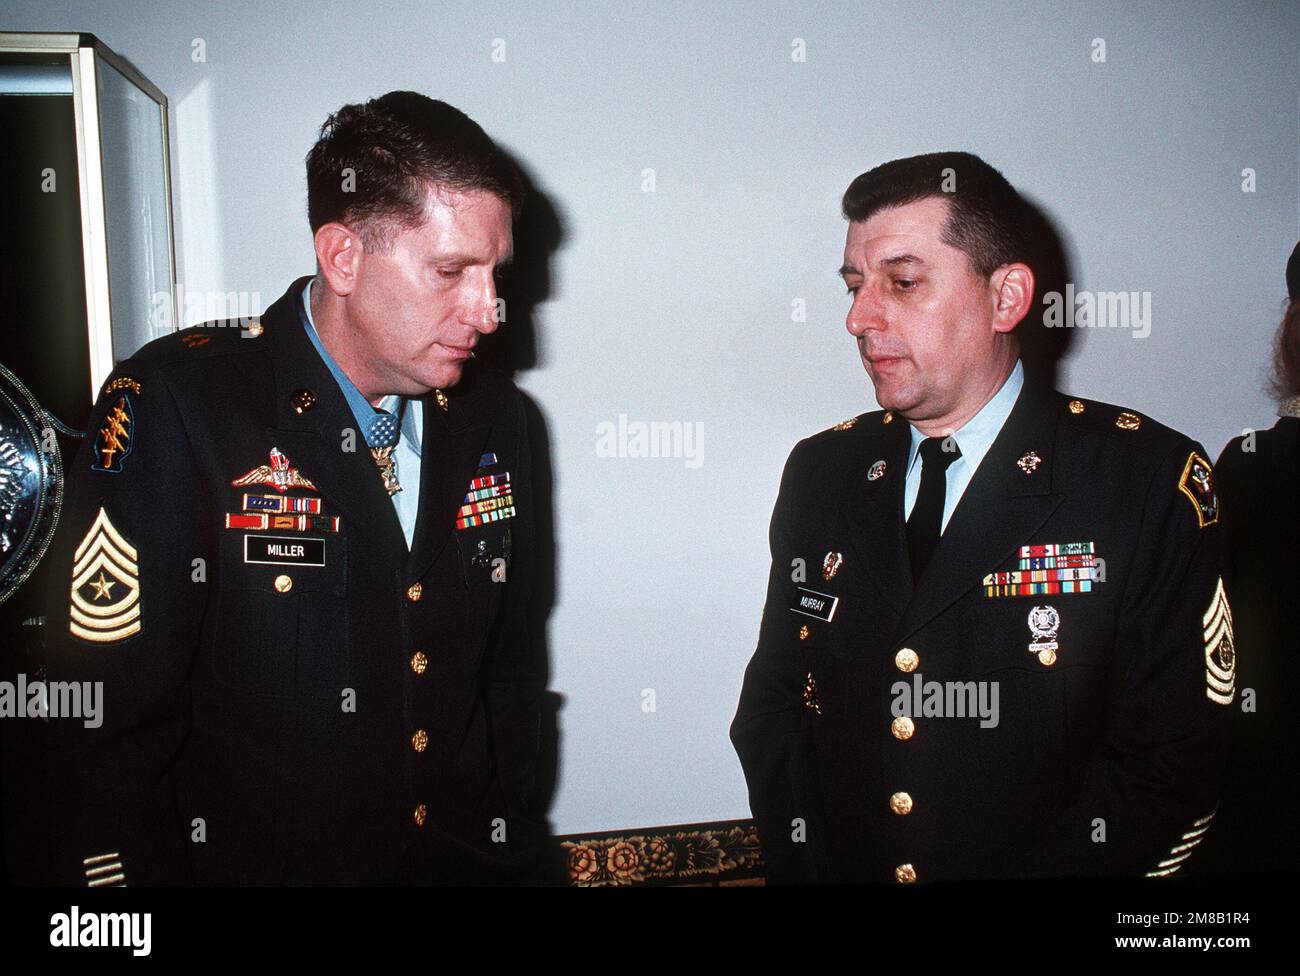 Medal of Honor recipients SGT. MAJ. Miller and SGT. MAJ. Robert C. Murray converse during the Medal of Honor breakfast being held in conjunction with inaugural functions for George H.W. Bush, 41st president of the United States. Base: Washington State: District Of Columbia (DC) Country: United States Of America (USA) Stock Photo